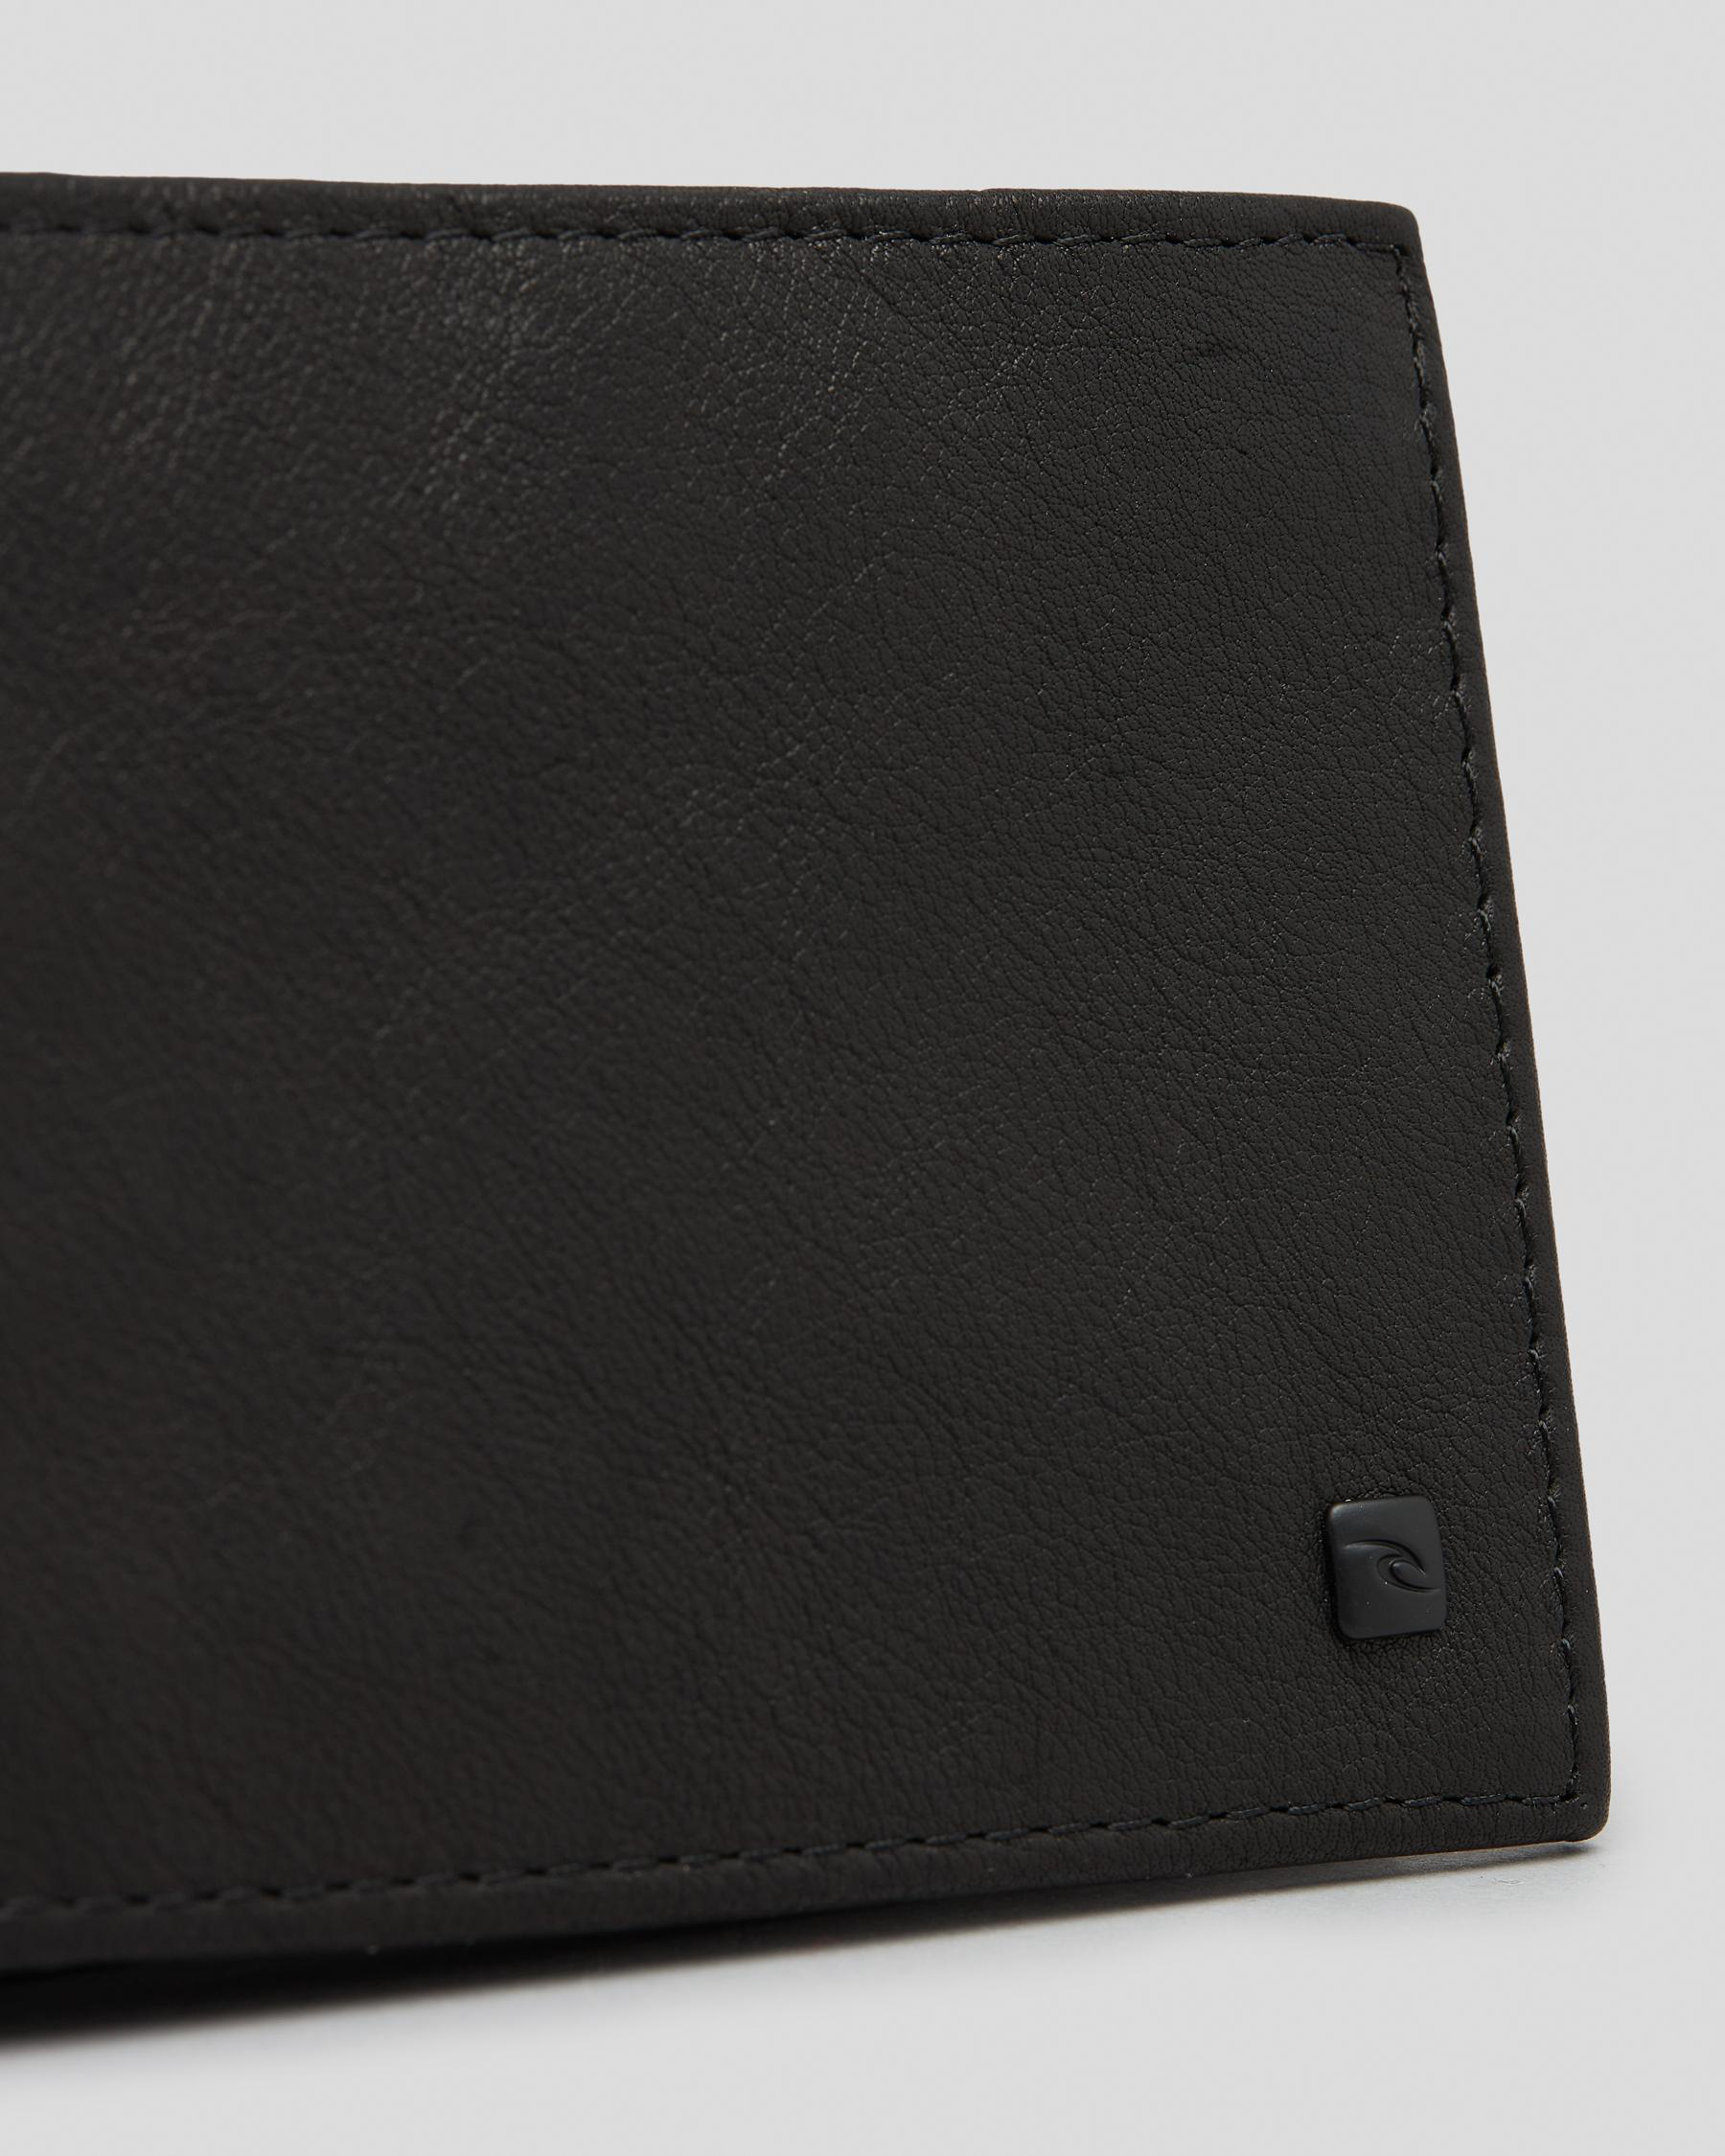 Rip Curl K-Roo RFID Wallet In Black - FREE* Shipping & Easy Returns